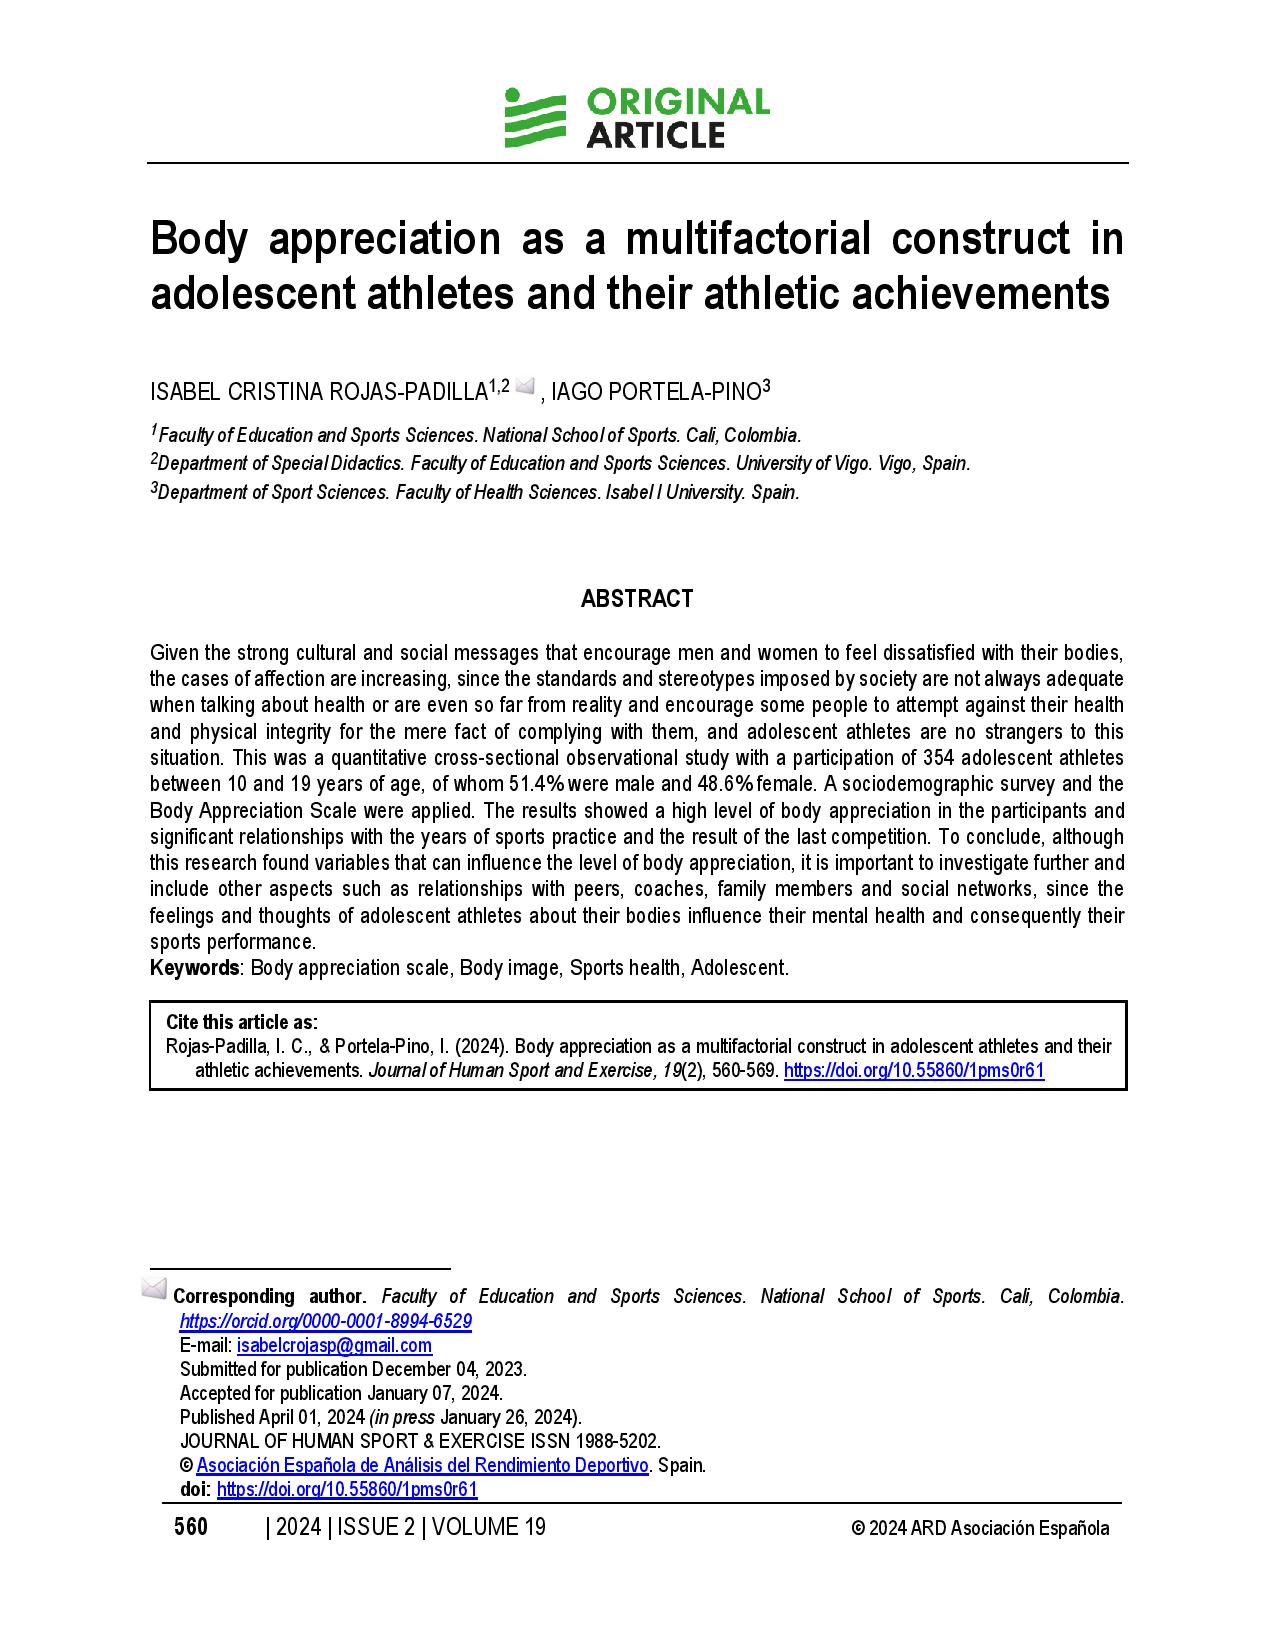 Body appreciation as a multifactorial construct in adolescent athletes and their athletic achievements